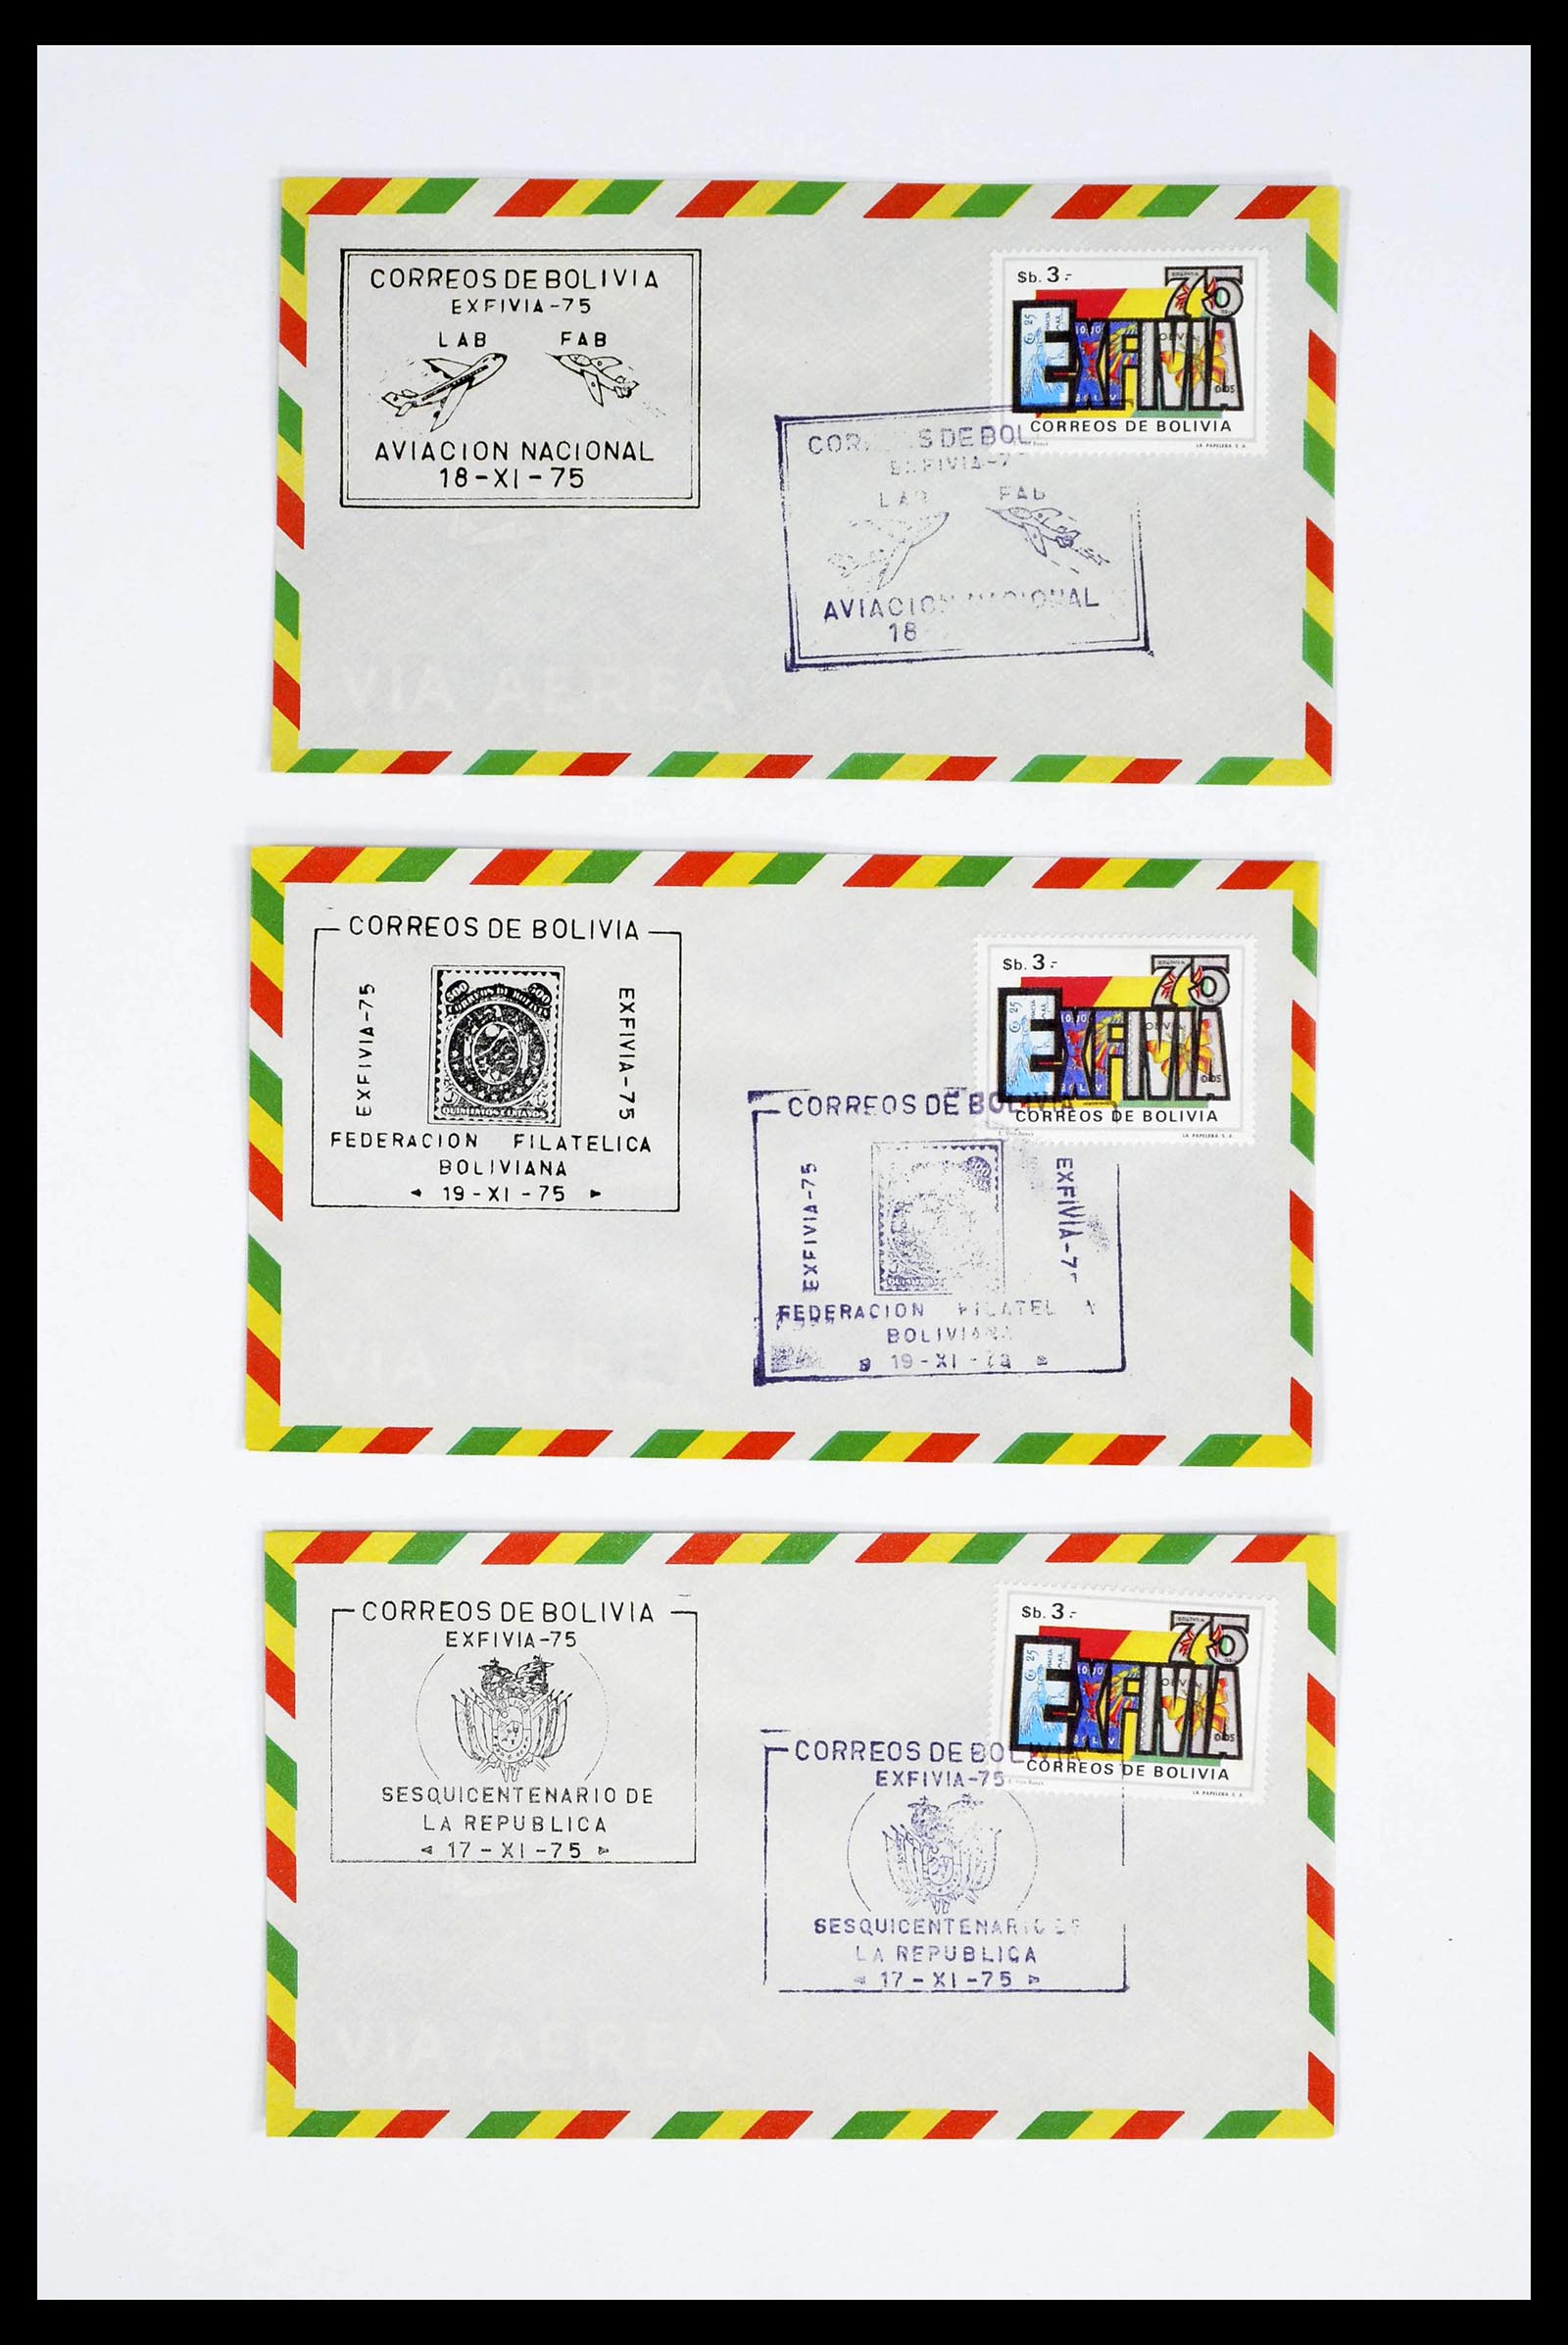 39271 0024 - Stamp collection 39271 Bolivia covers 1950-1980.